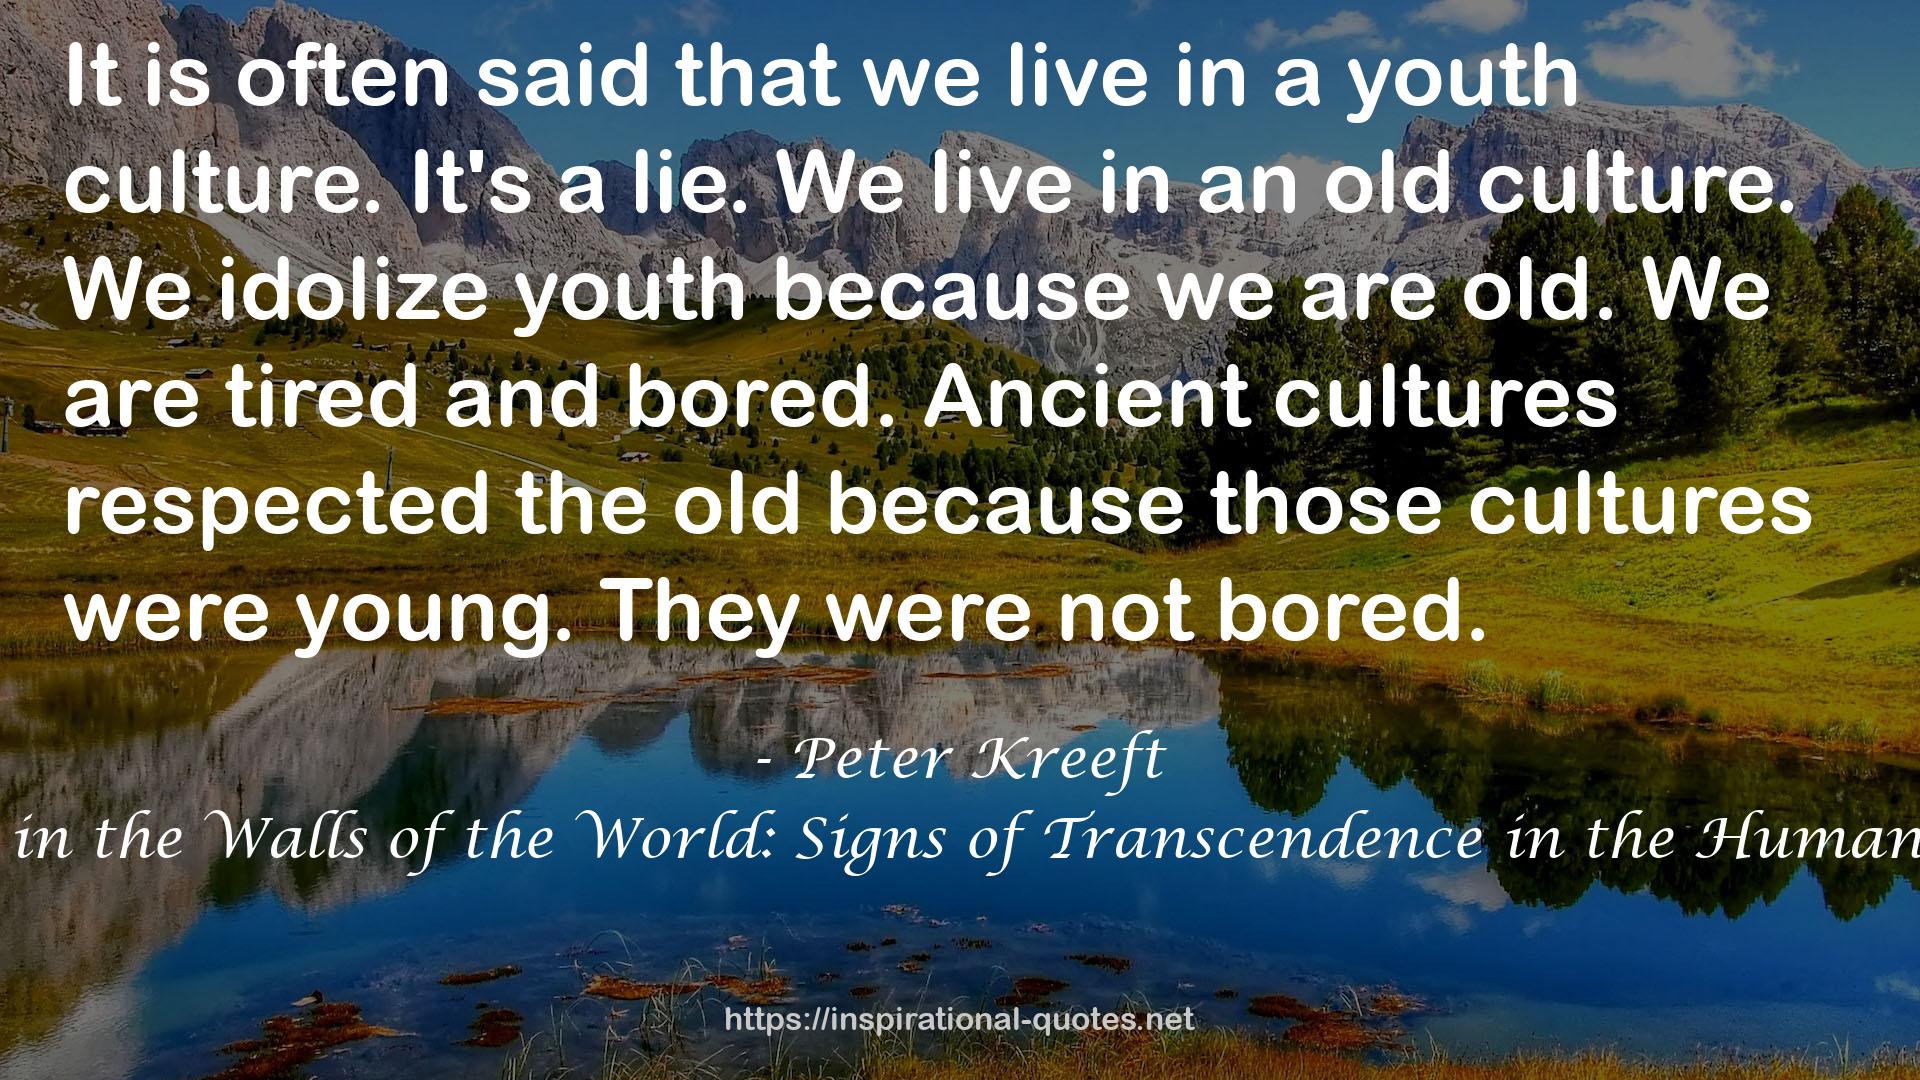 Doors in the Walls of the World: Signs of Transcendence in the Human Story QUOTES